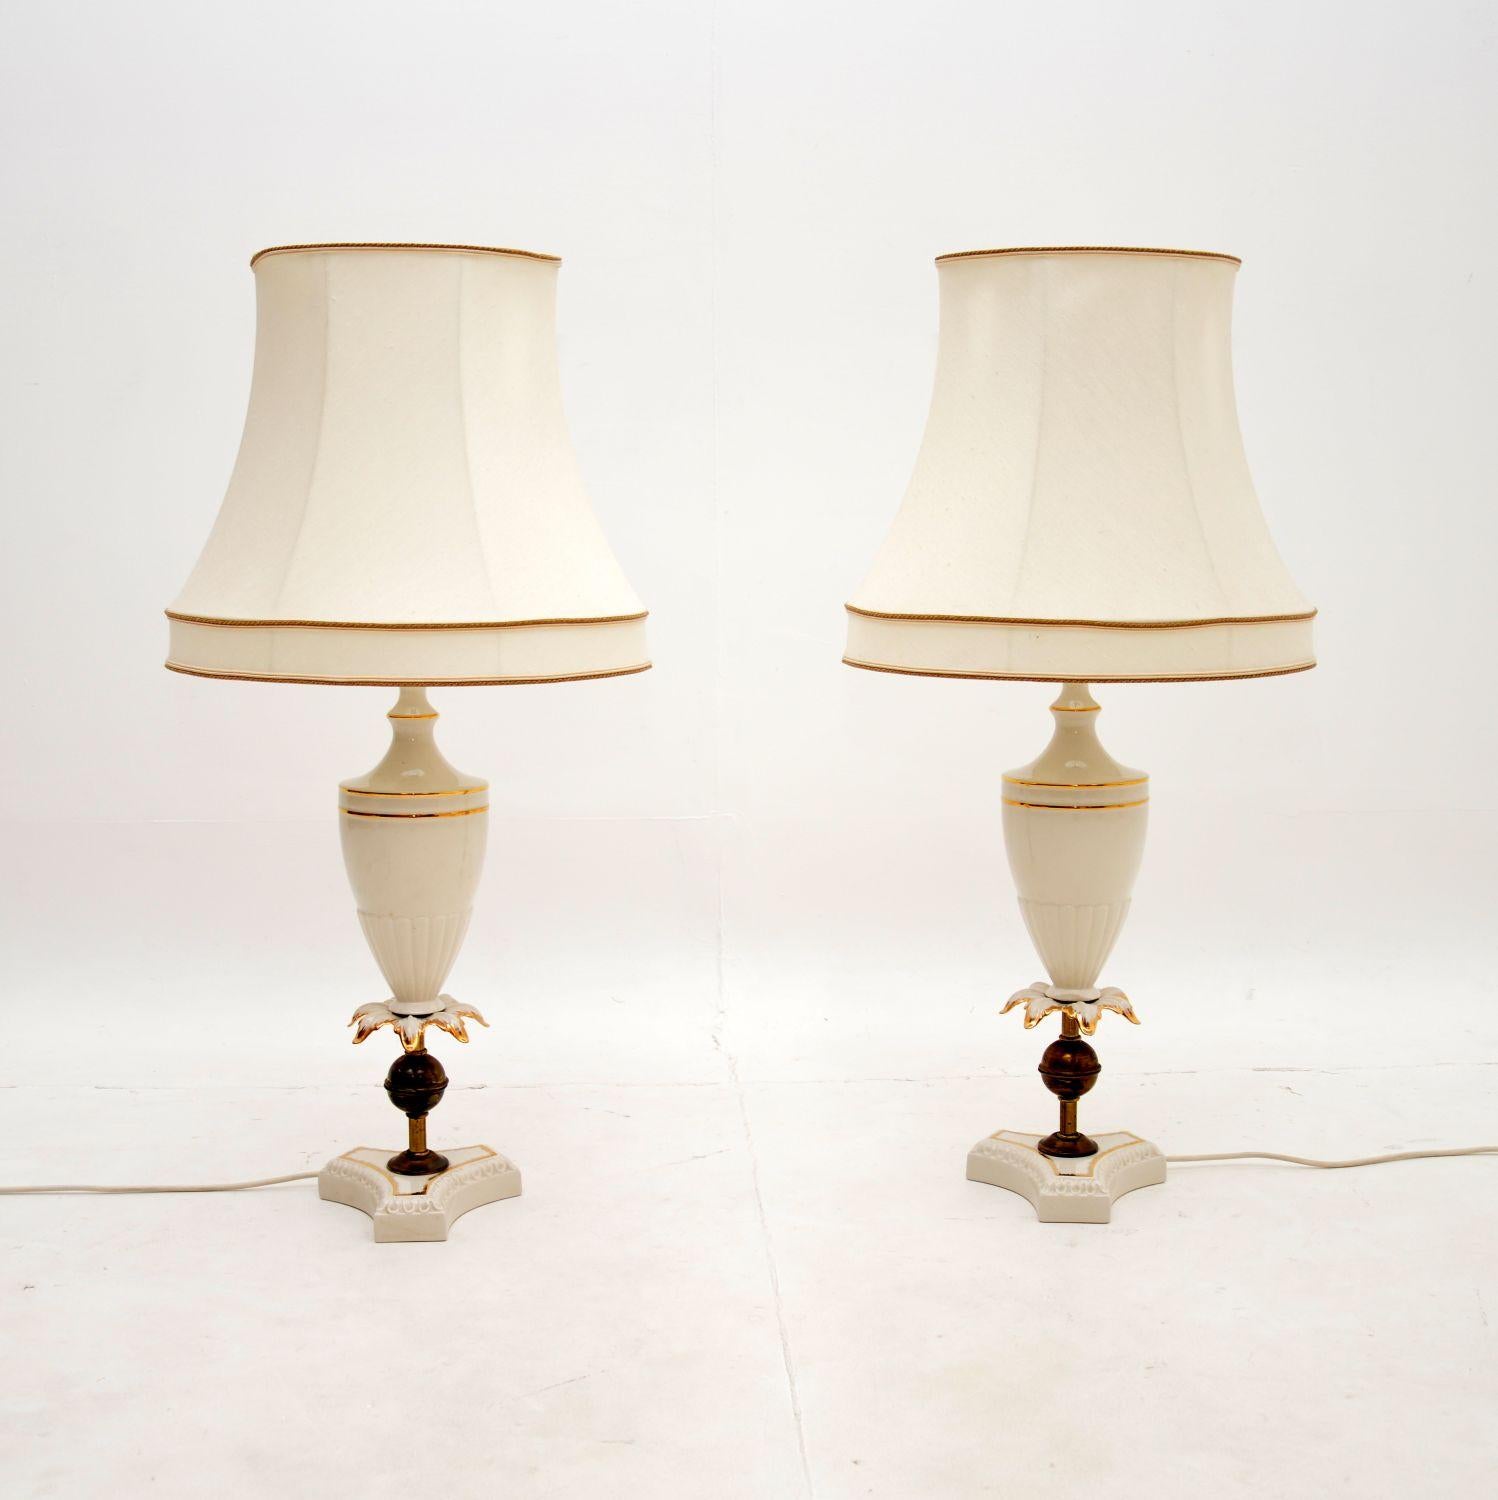 A beautiful pair of antique Italian ceramic table lamps. They were made in Italy and date from around the 1950-60’s.

The quality is fantastic, they are beautifully made with a gorgeous design. The white ceramic stands have gold embellishment, and